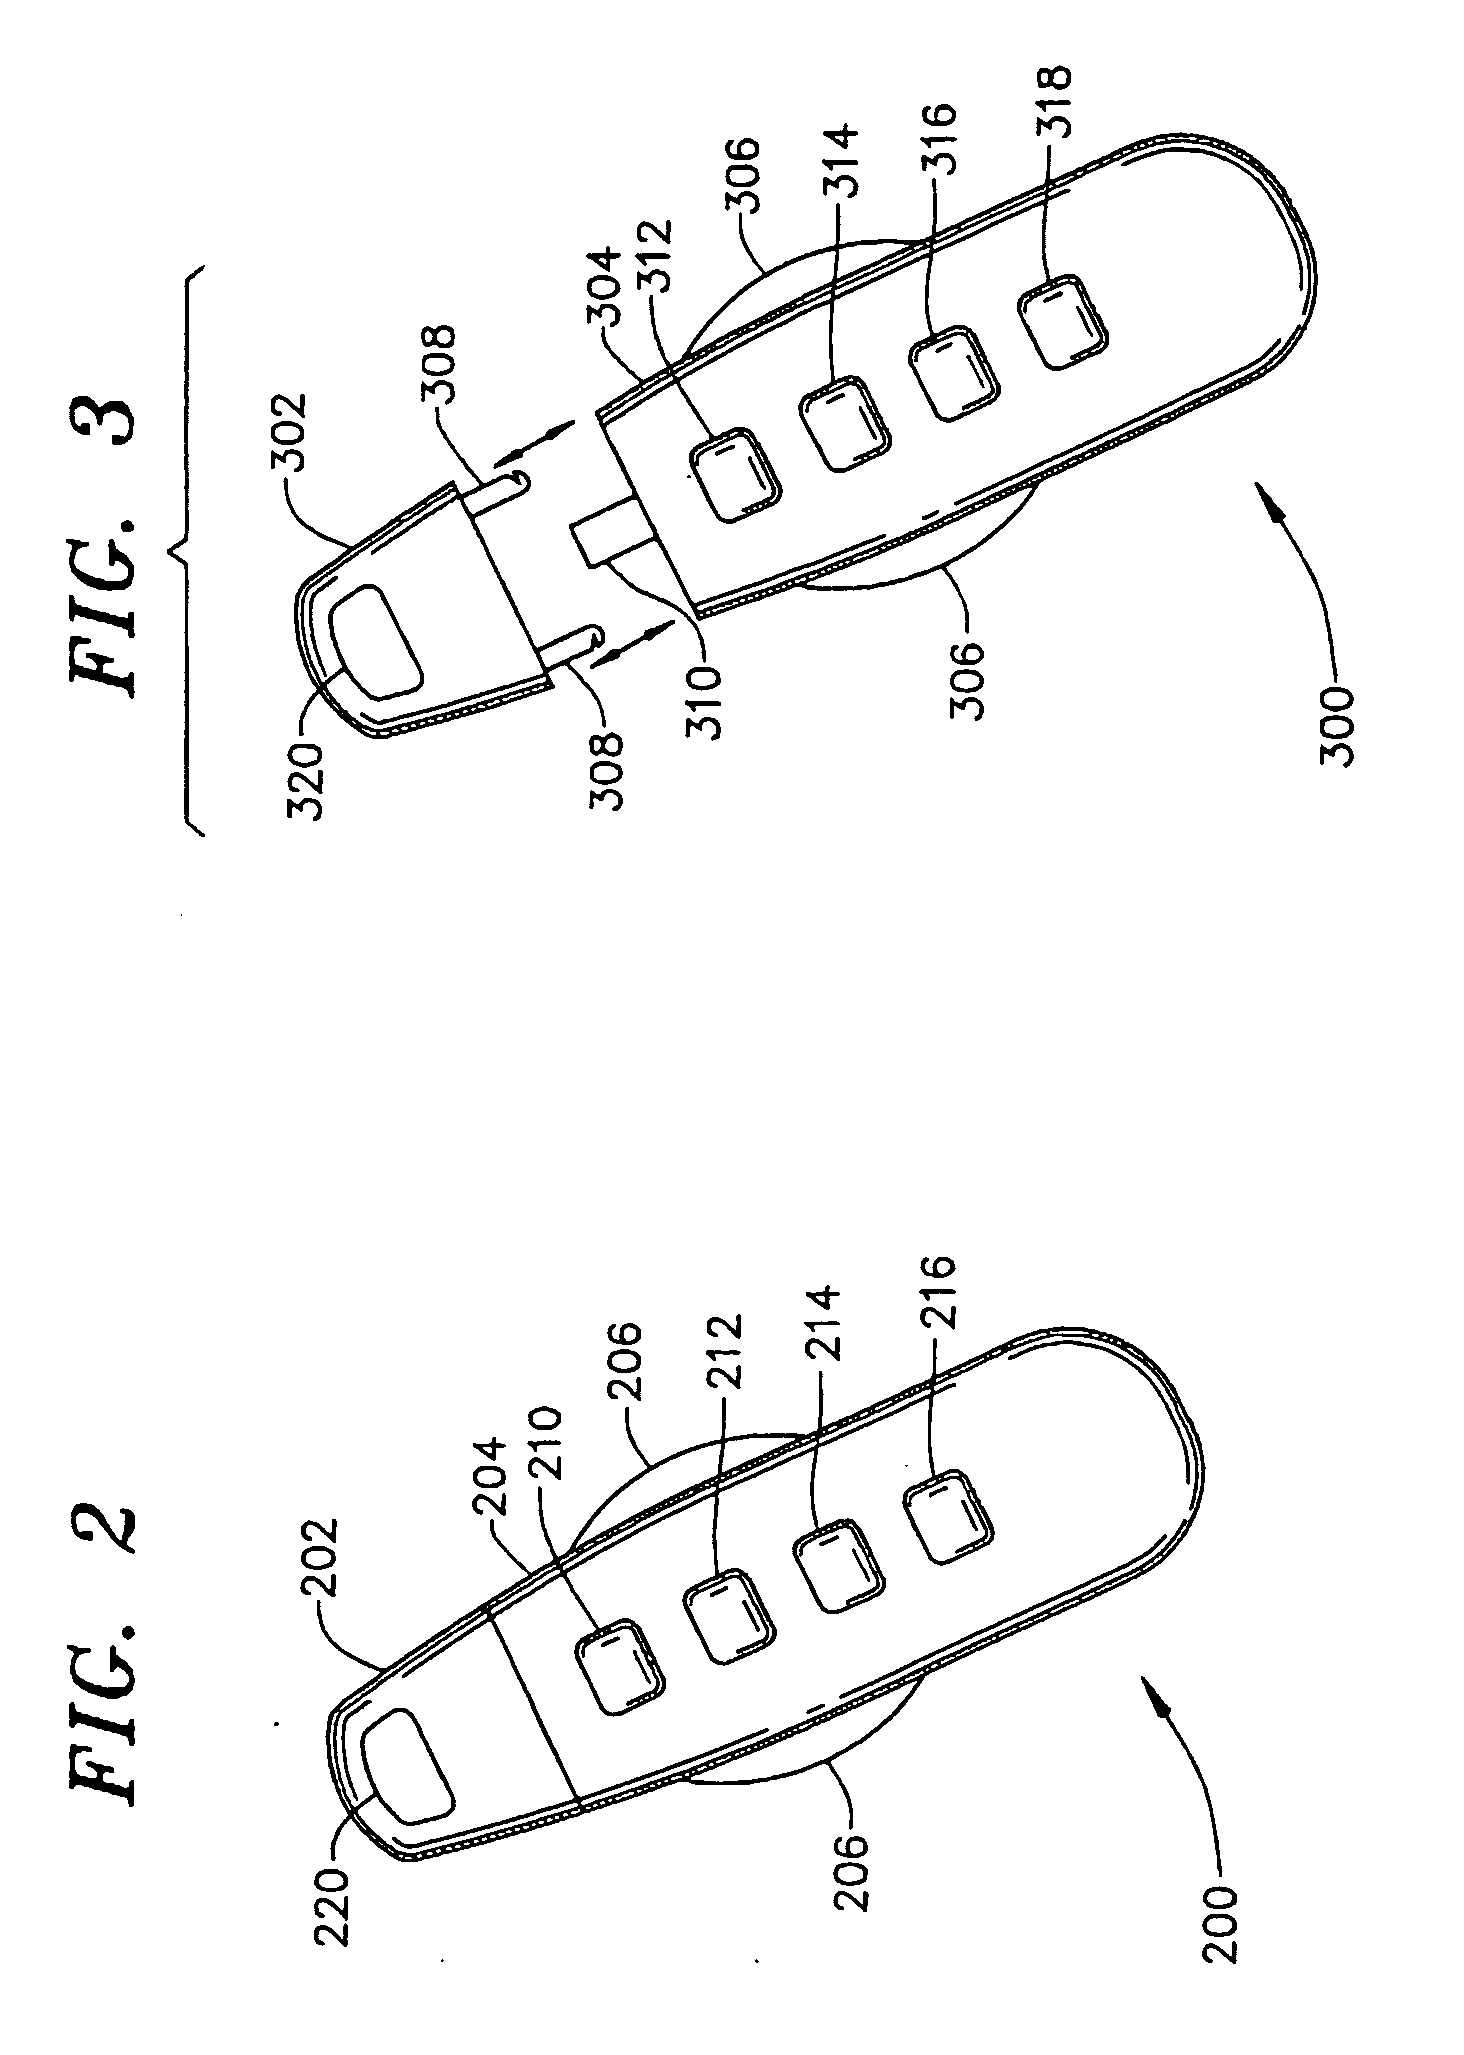 Remote Keyless Entry Device with Integrated Accessible Memory Storage